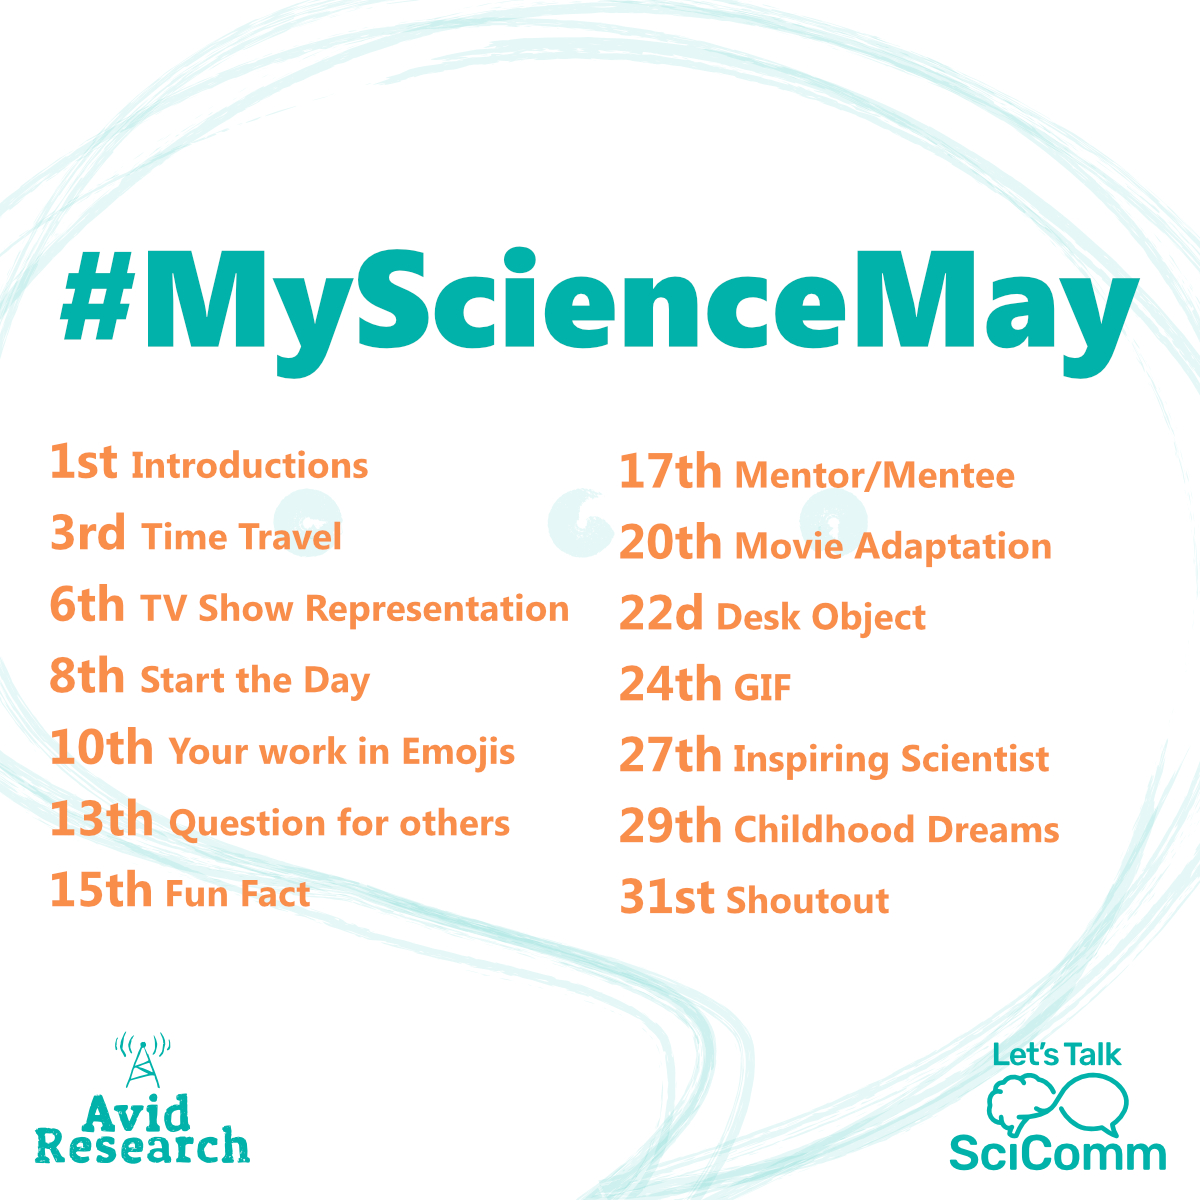 Happy Monday in #MyScienceMay and today we're going a bit lighthearted! What TV show best (or worst) represents your work? Mythbusting very welcome here! And don't worry if you haven't responded to all the posts, just share what you can when you can!
#SciComm @letstalkscicomm